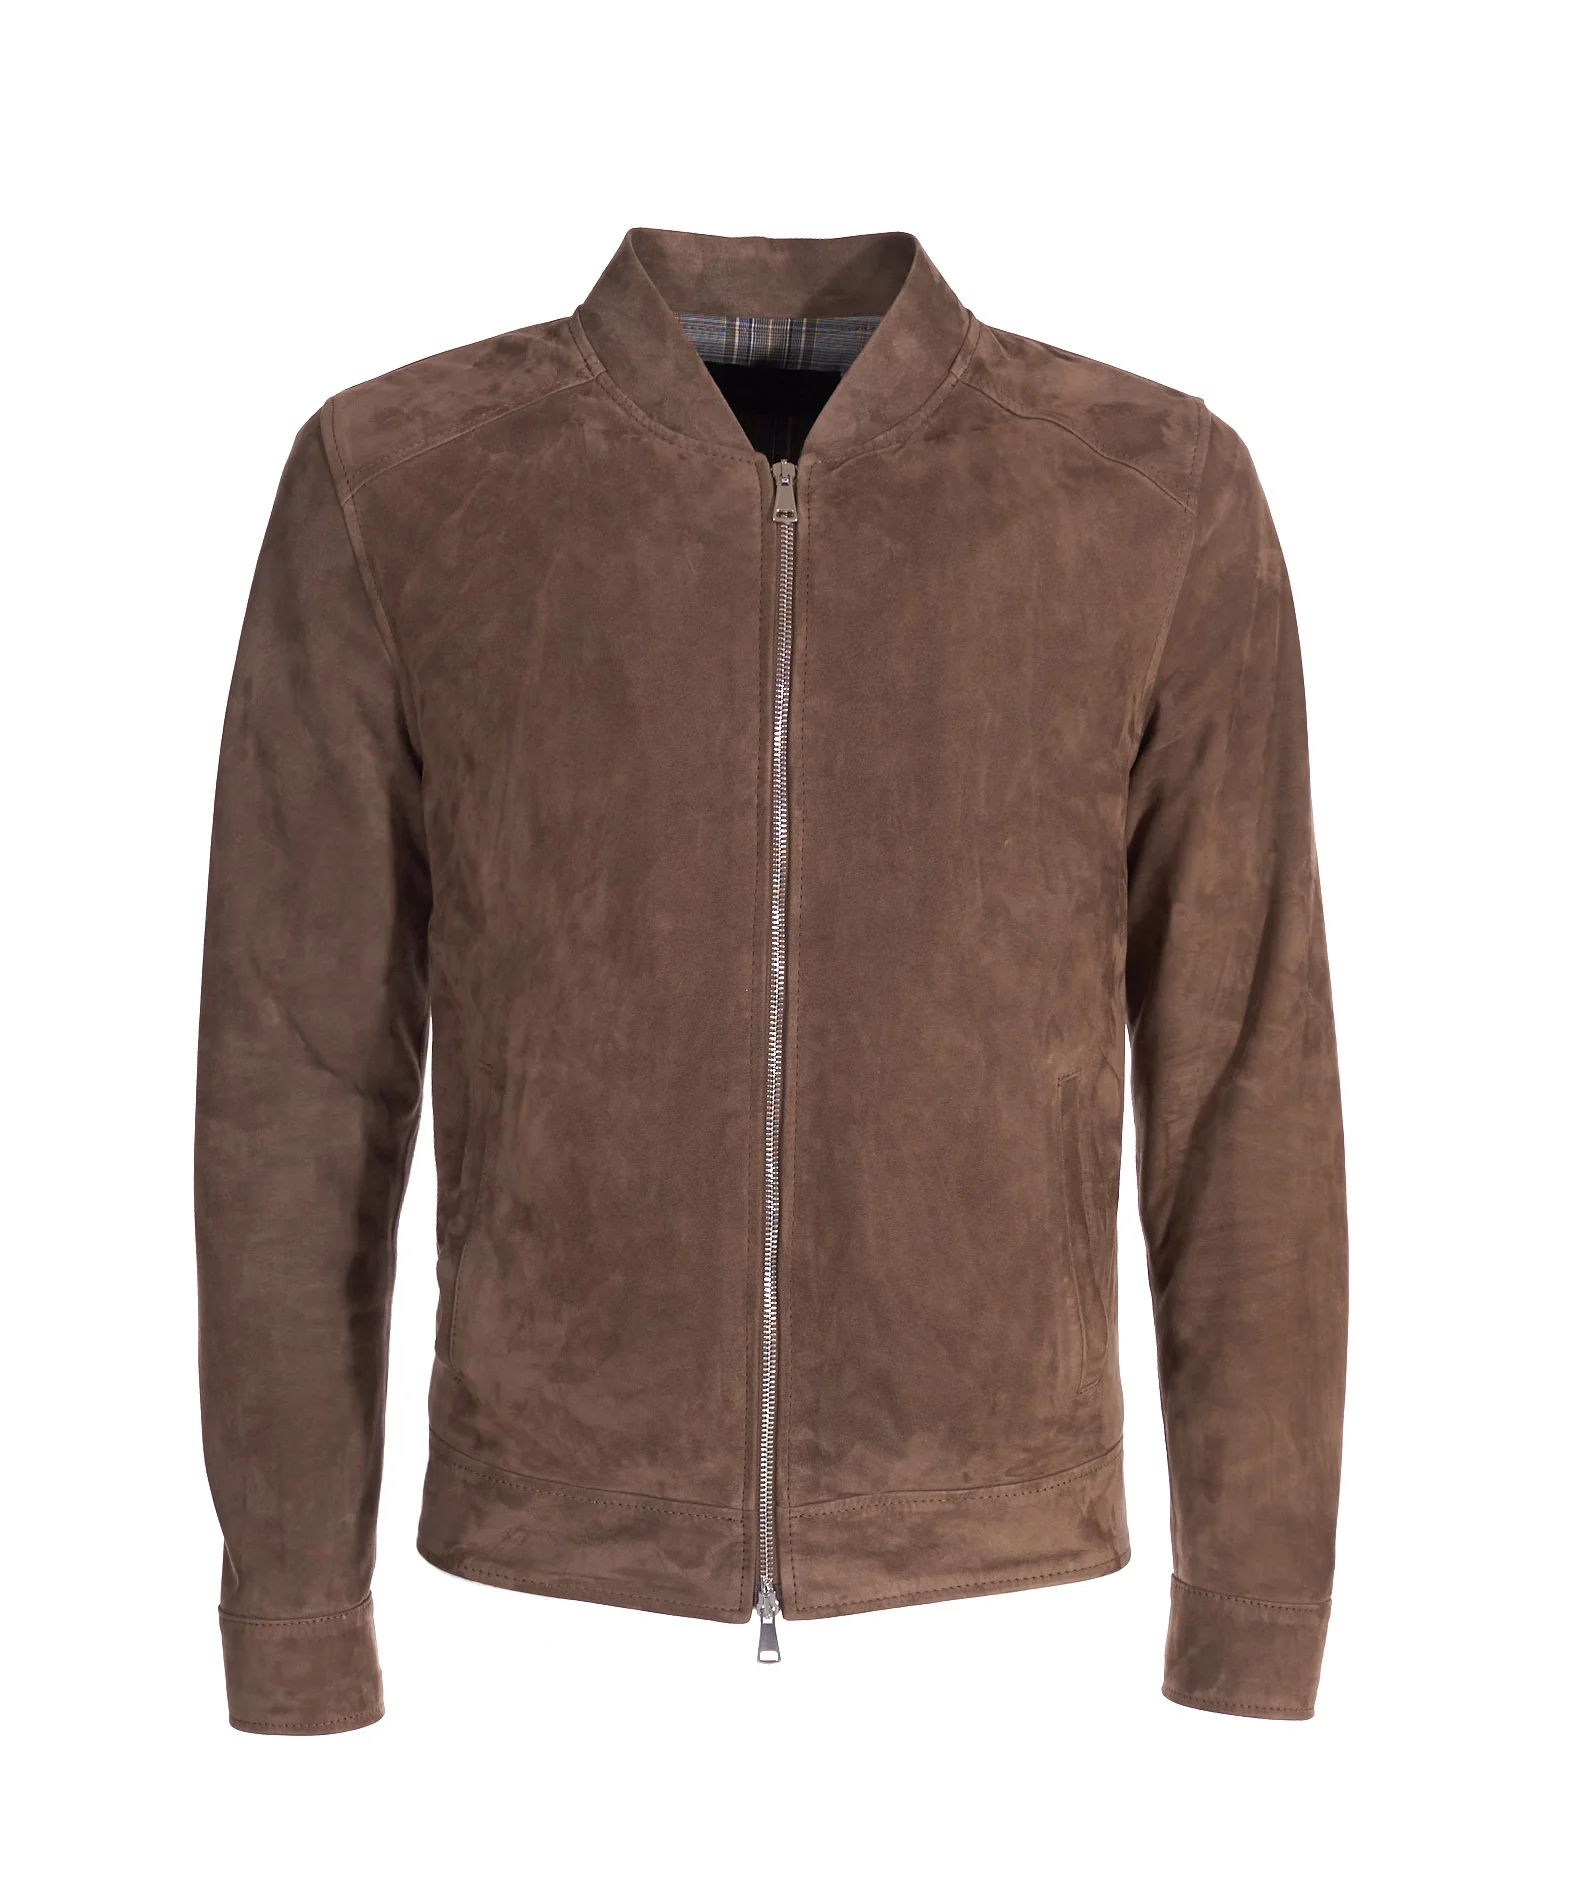 Luxury Clothing Made In Italy Men Taupe Suede Jacket Oem Services 100% ...